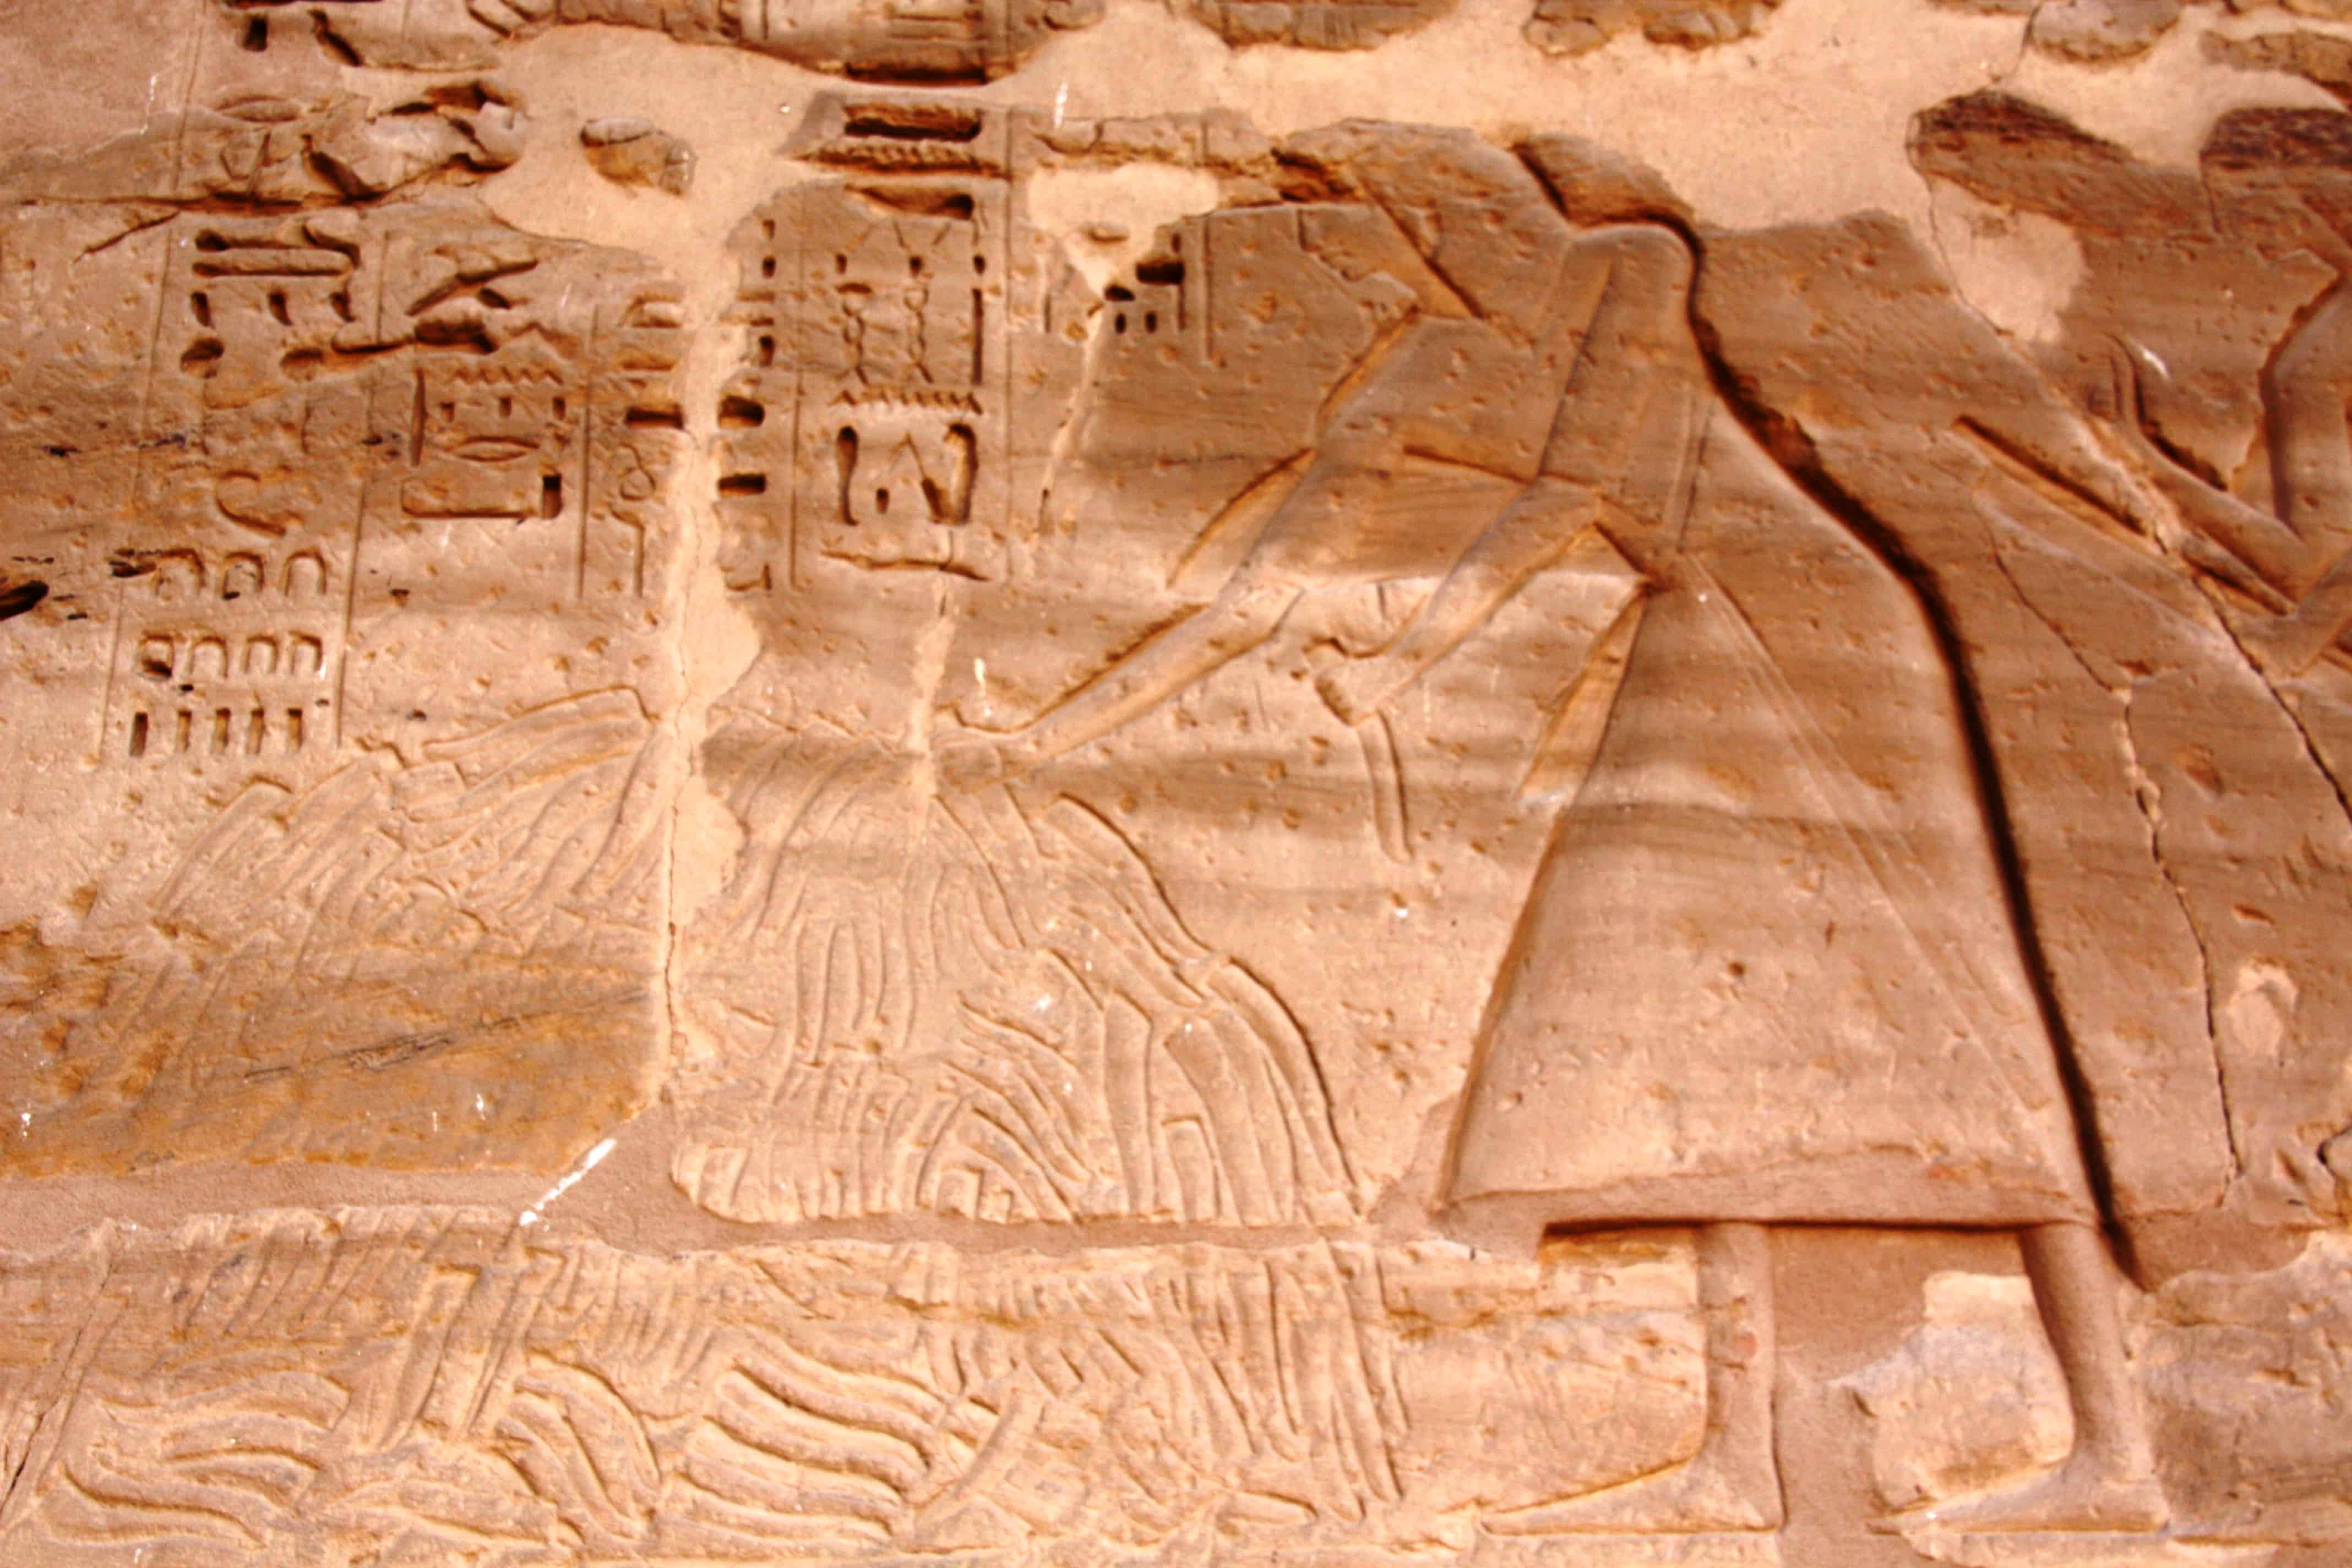 Wall carving in the temple of Medinet Habu in Luxor shows scribes collecting castrated parts of fallen enemies.